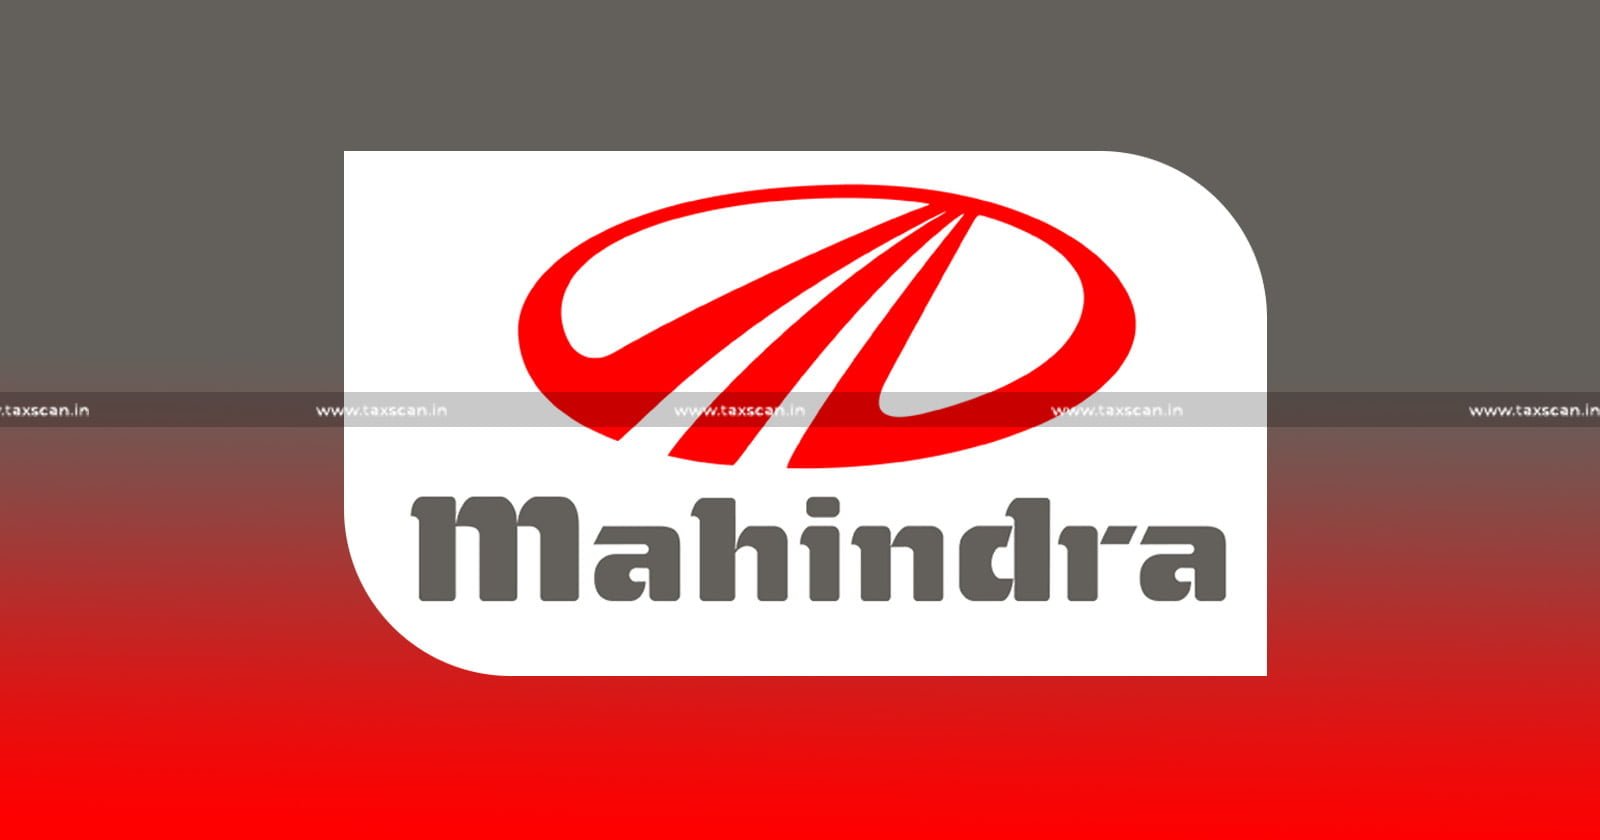 Mahindra and Mahindra - CESTAT - Automobile Cess - Cess - Basic Excise Duty - Excise Duty - Taxscan